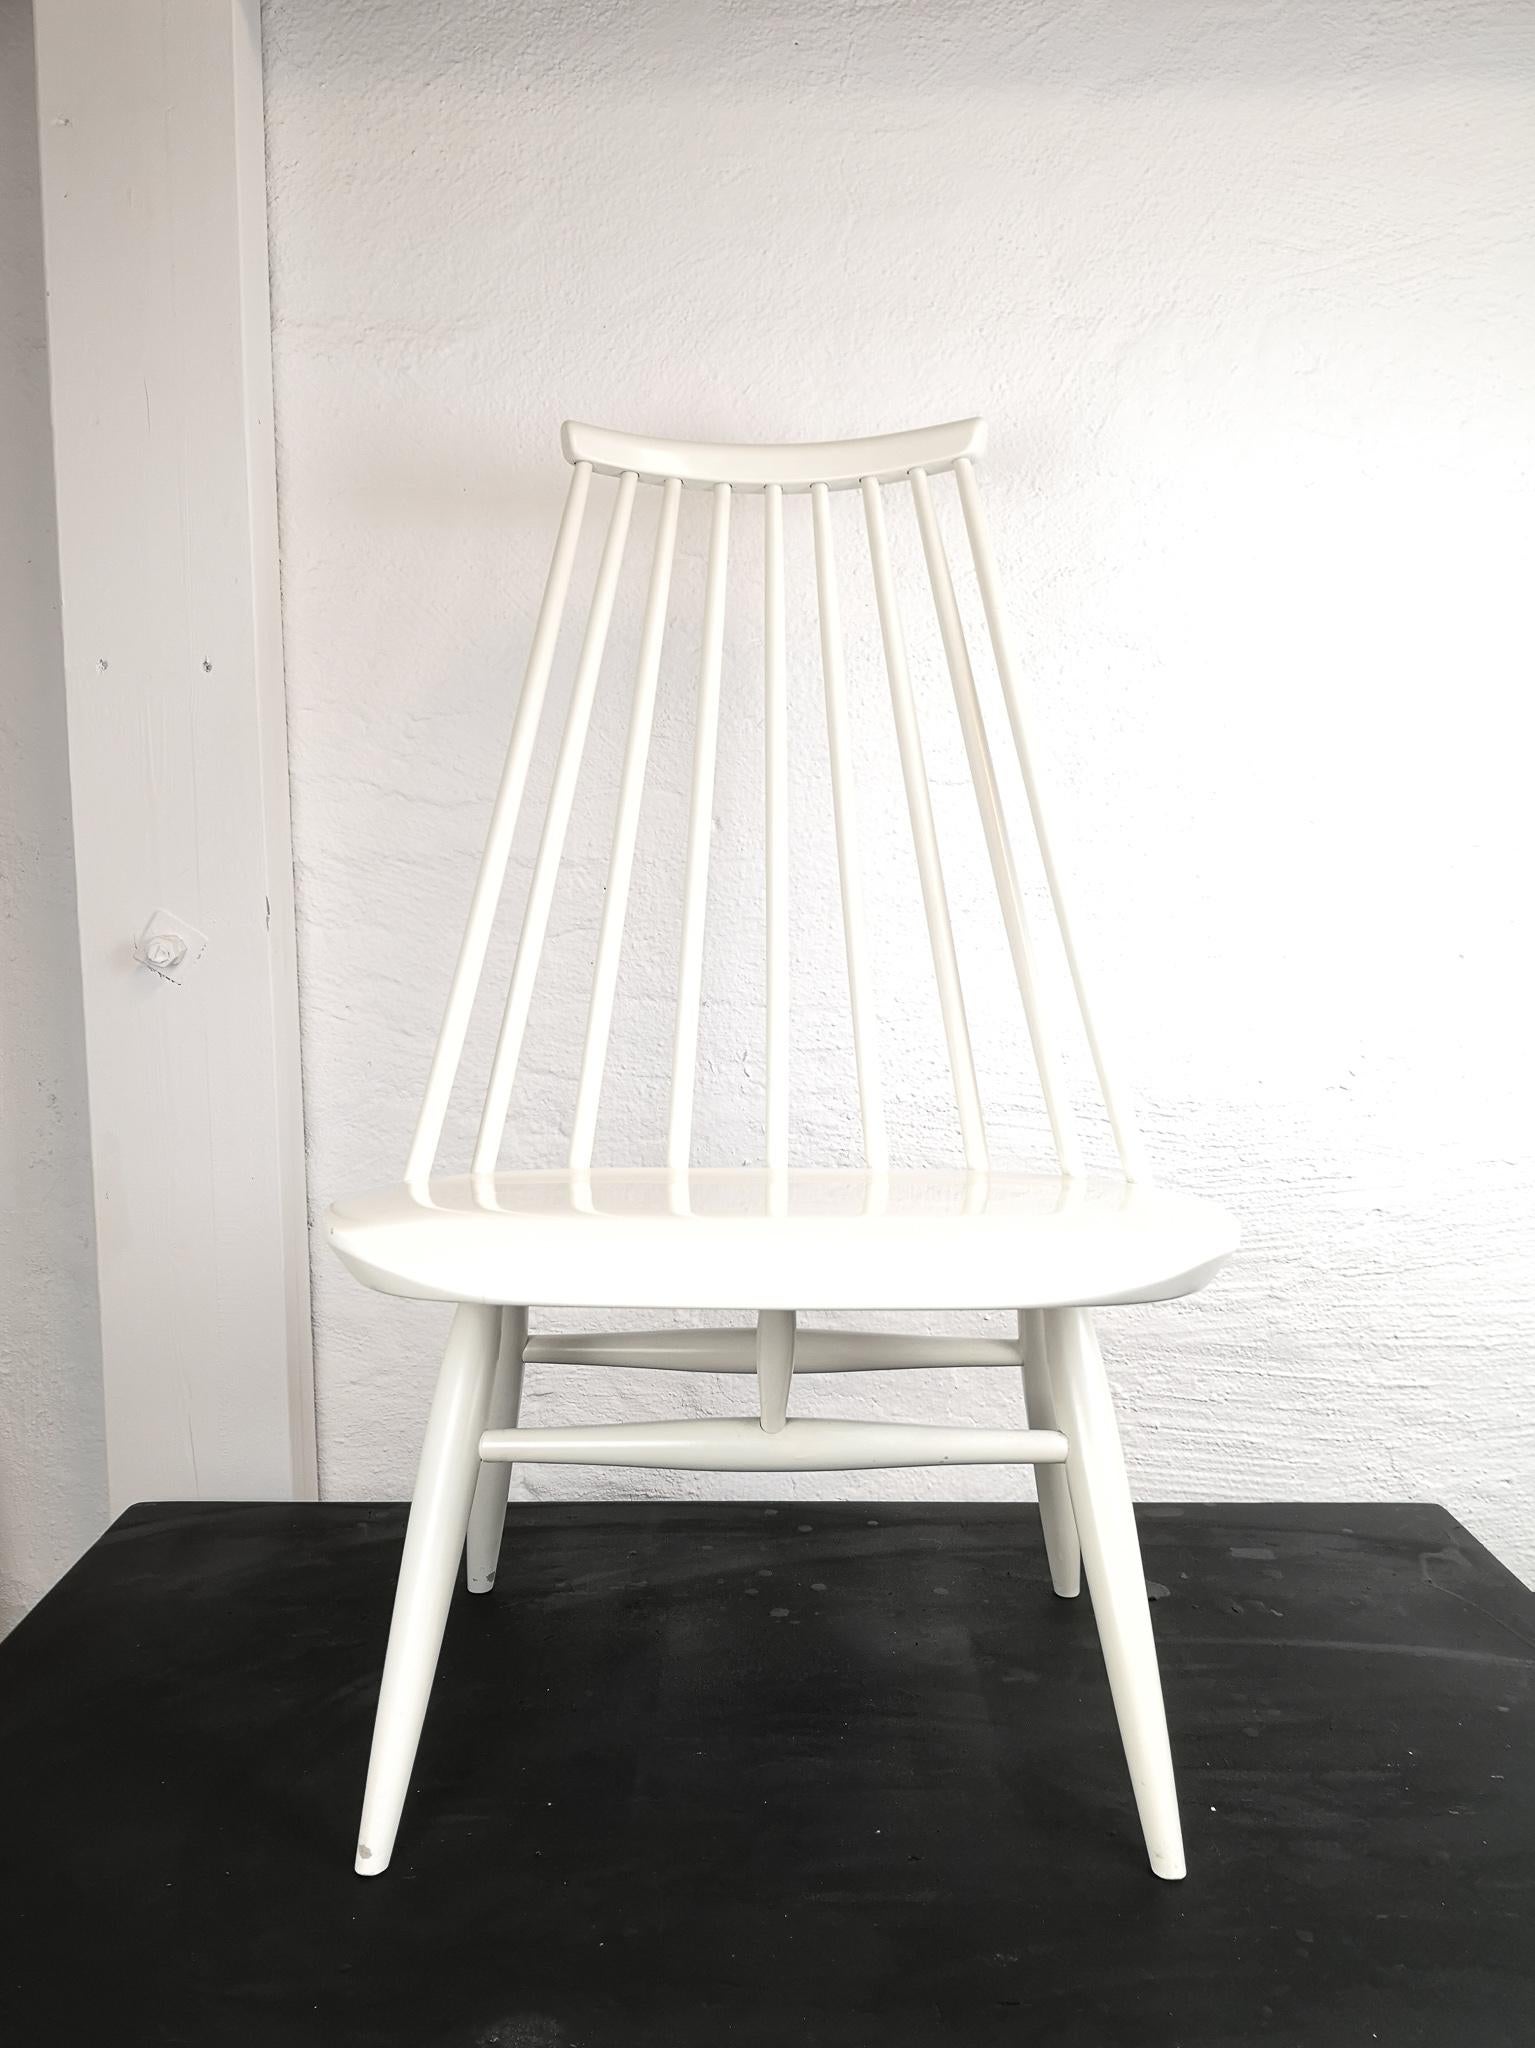 This Iconic 'Mademoiselle' chair designed by Illmari Tapiovaara for Edsby-verken, Sweden, with unique bentwood seats and curved backrest, original pale chartreuse finish, marked with sticker to the underside. This is the original made at Edsbyverken